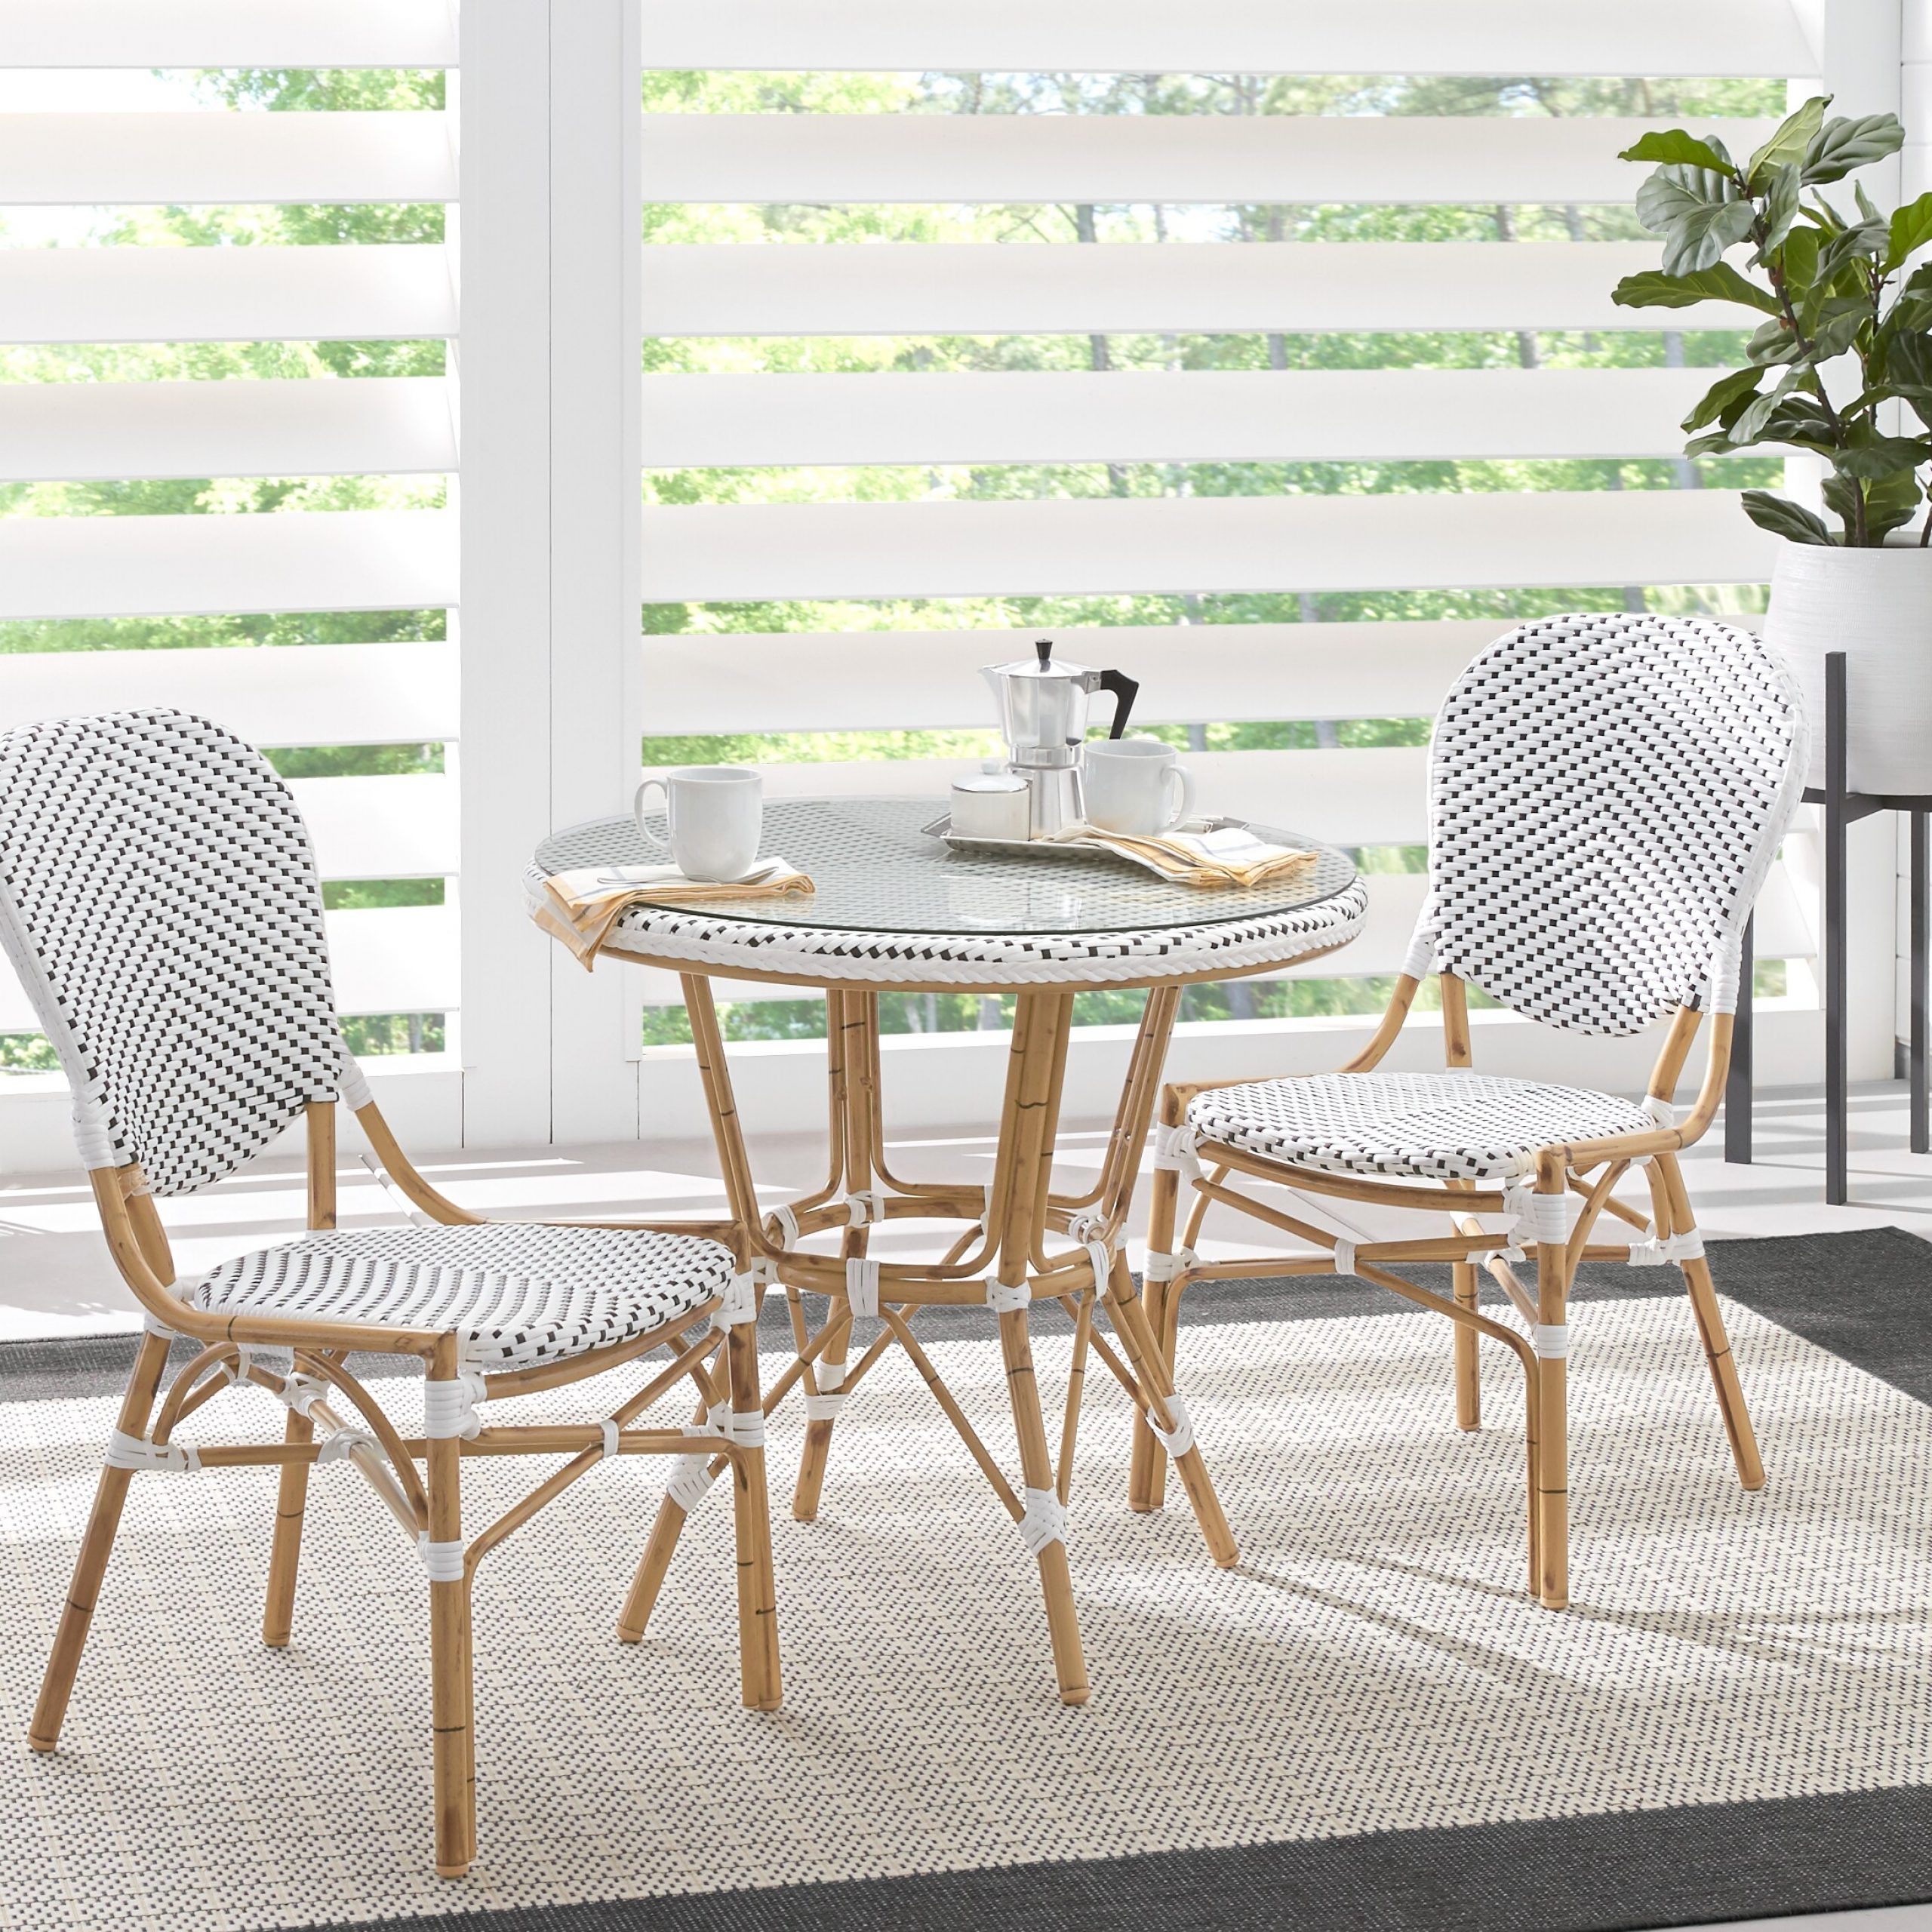 Juliette White 3 Pc Outdoor Dining Set – Round, Wicker Regarding Fashionable White Outdoor Patio Dining Sets (View 9 of 15)